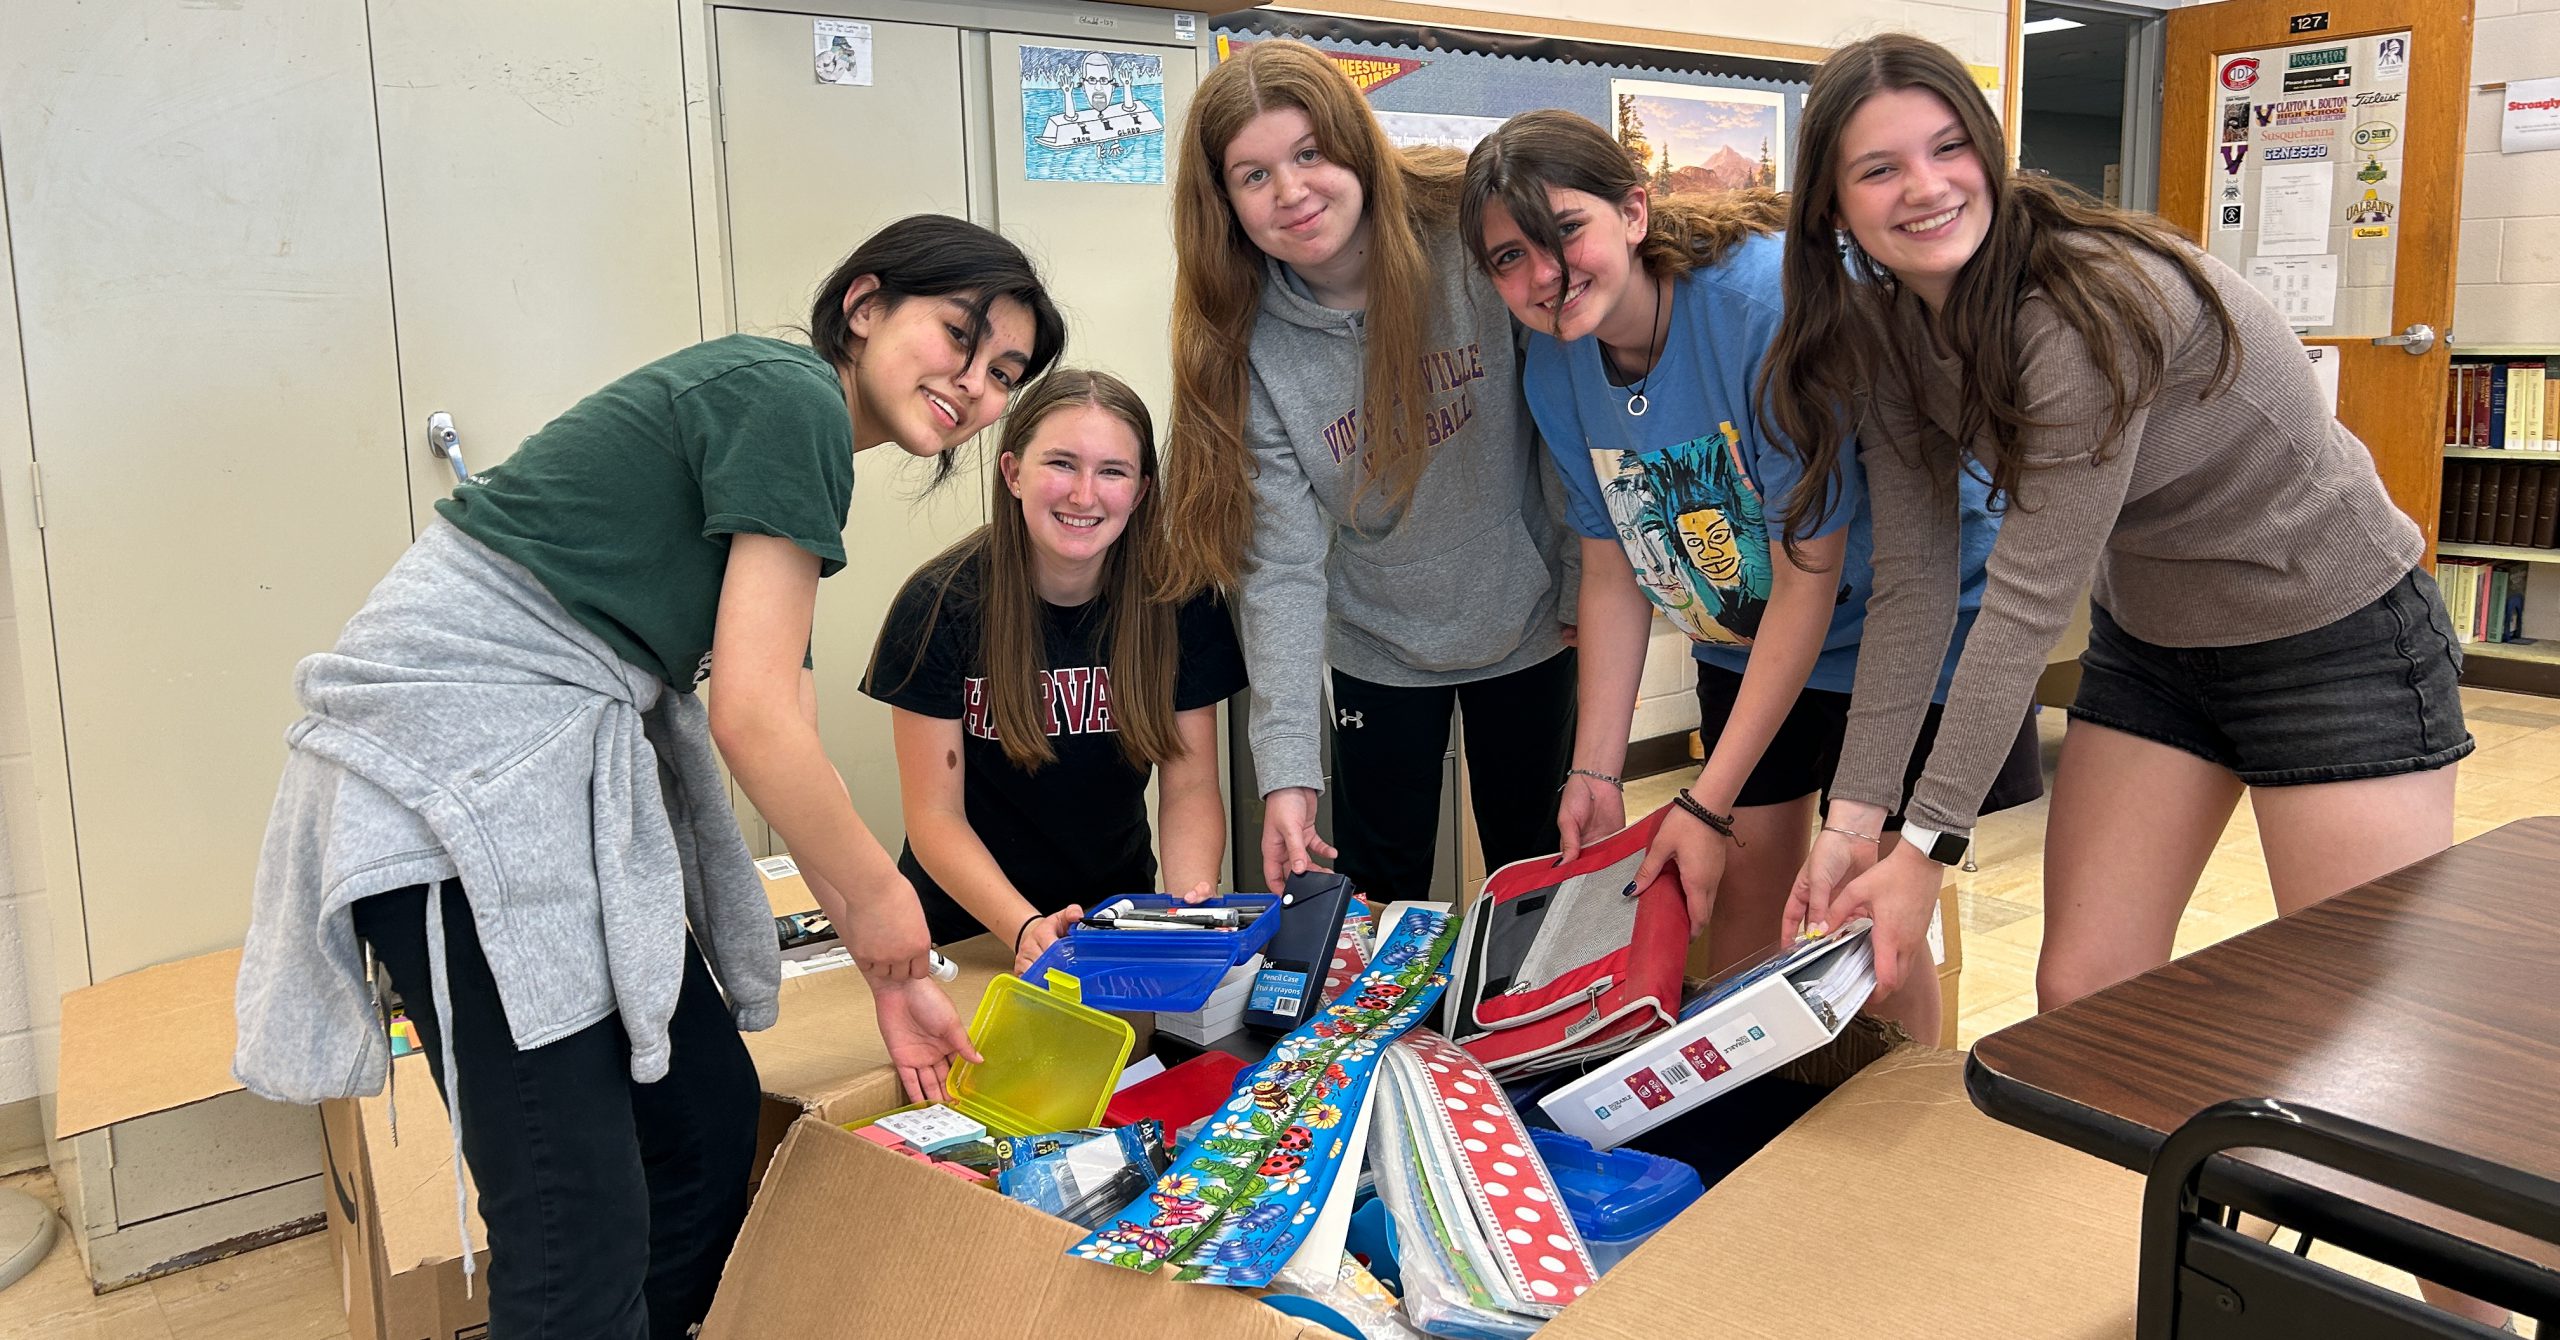 Five students surround a box of school supplies.